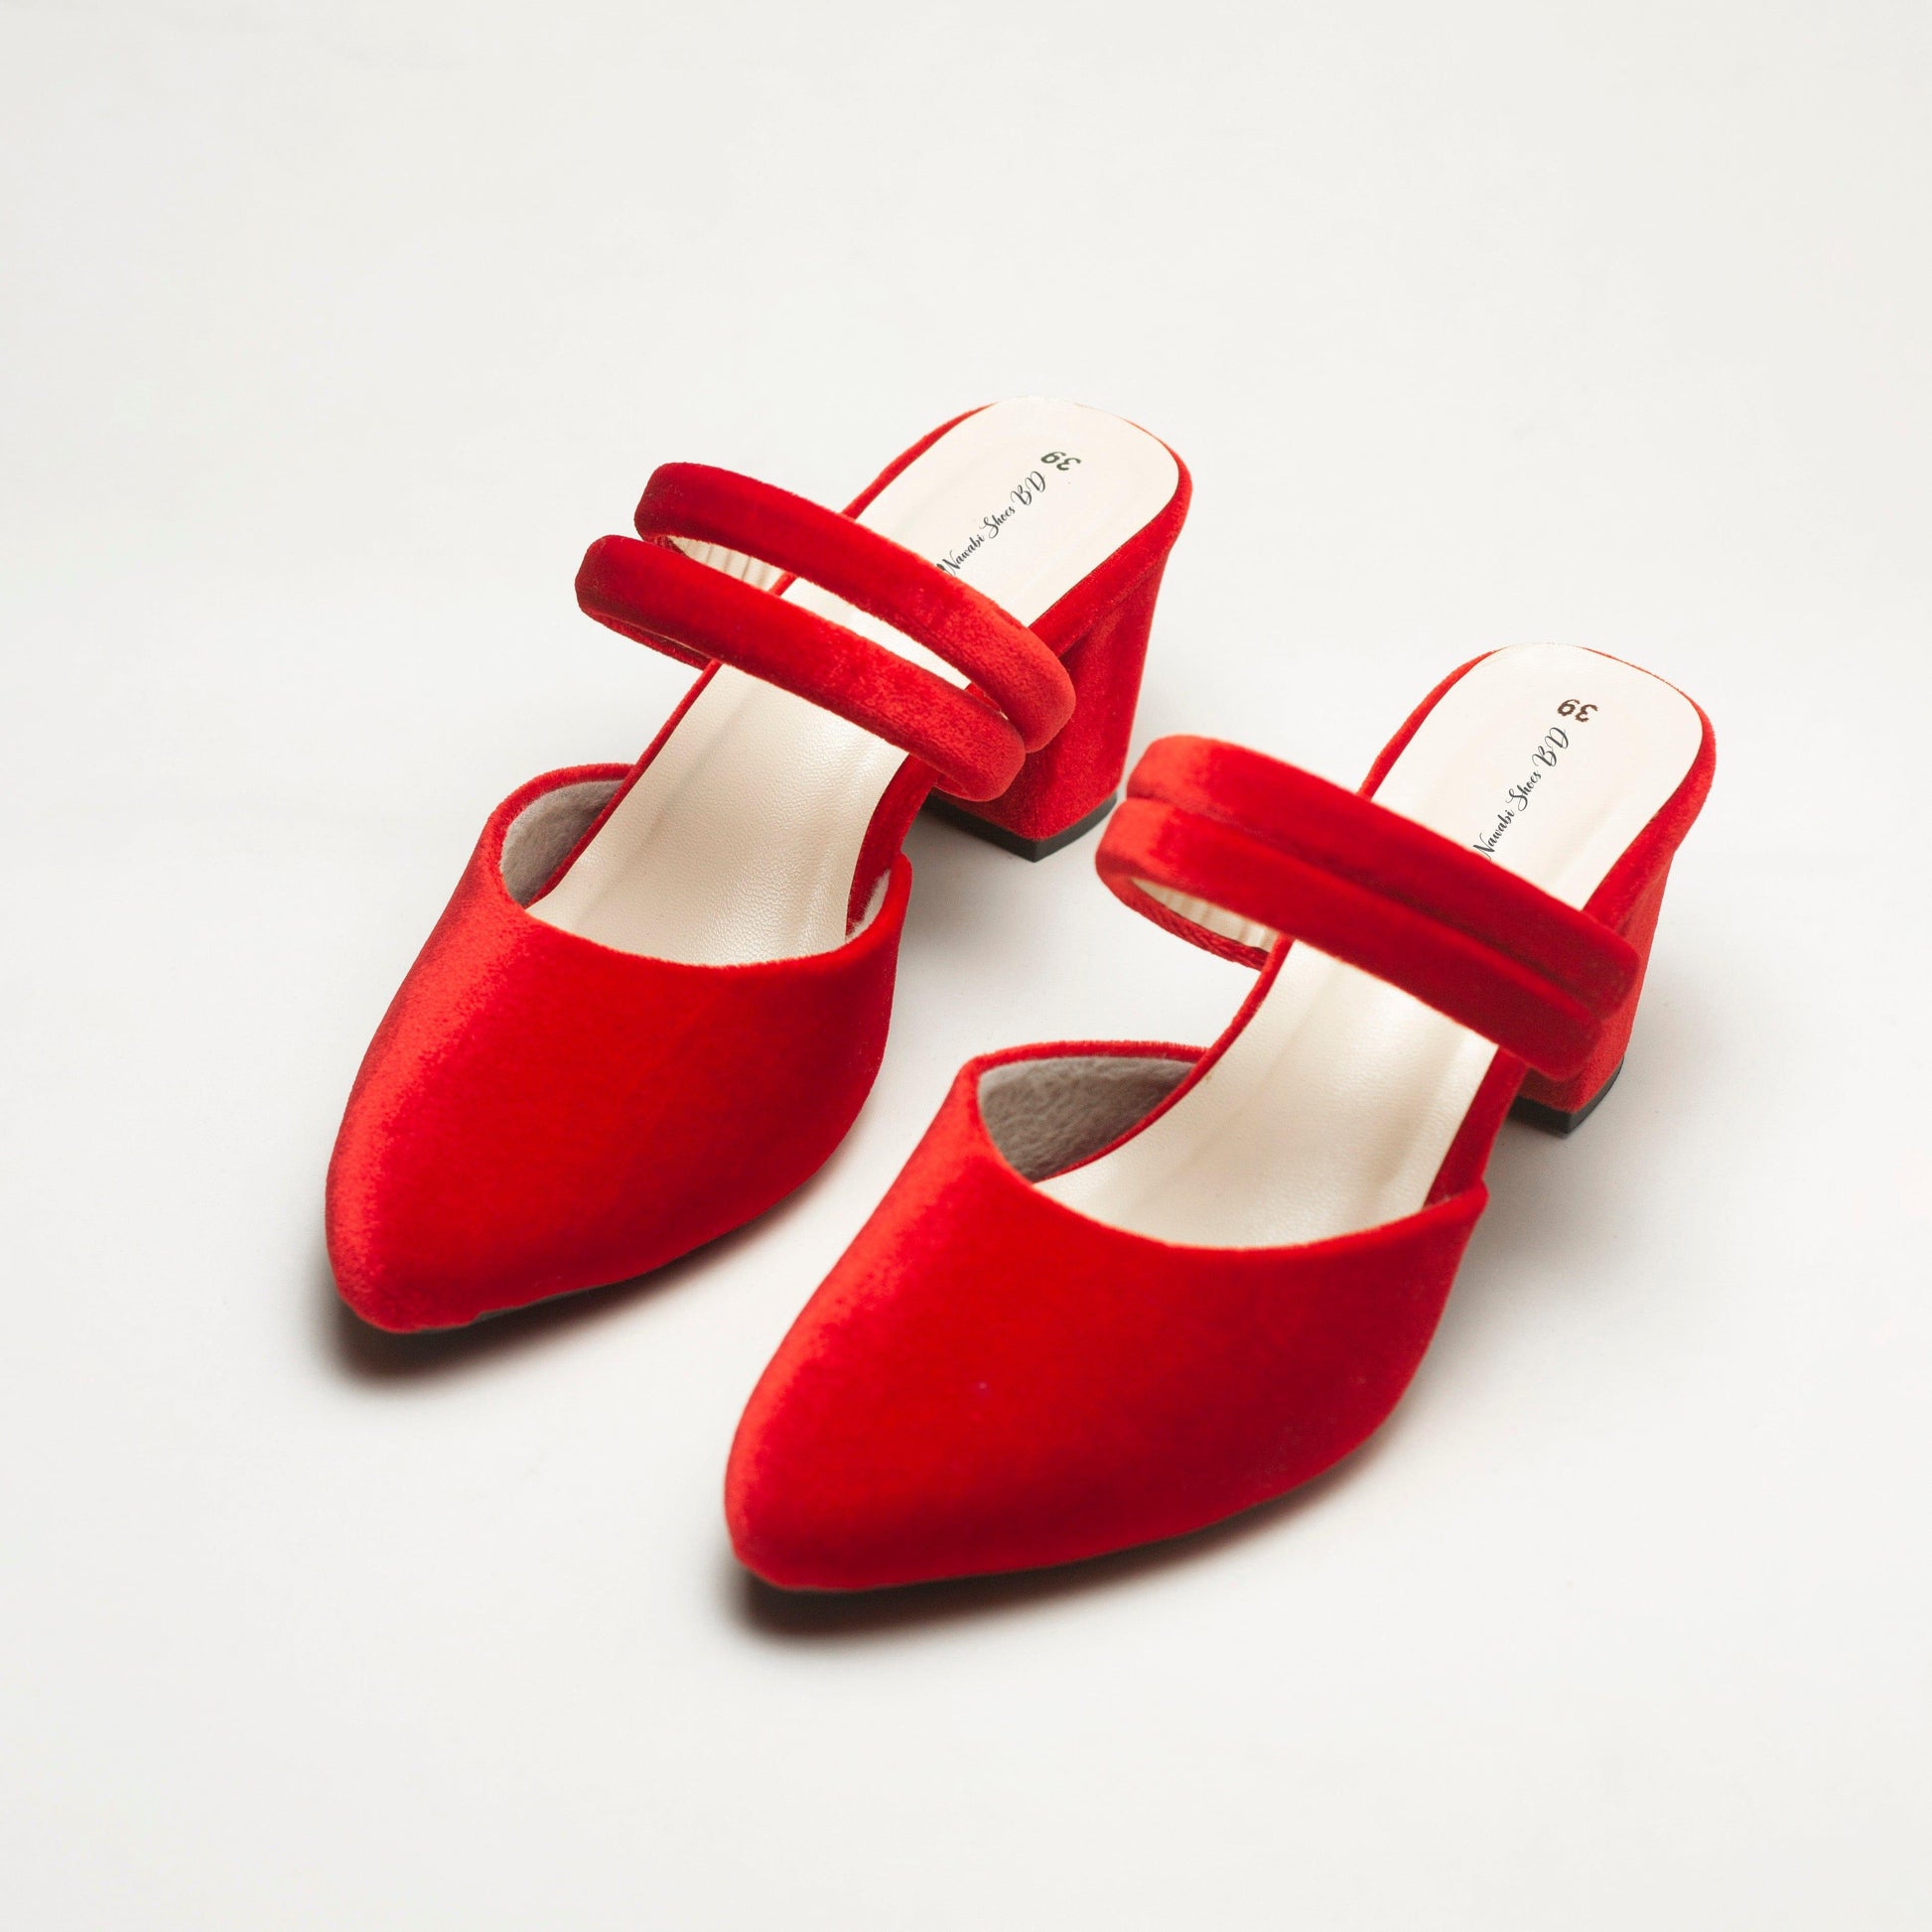 Nawabi Shoes BD Shoes 35 / red Block Heels Laxury Shoes